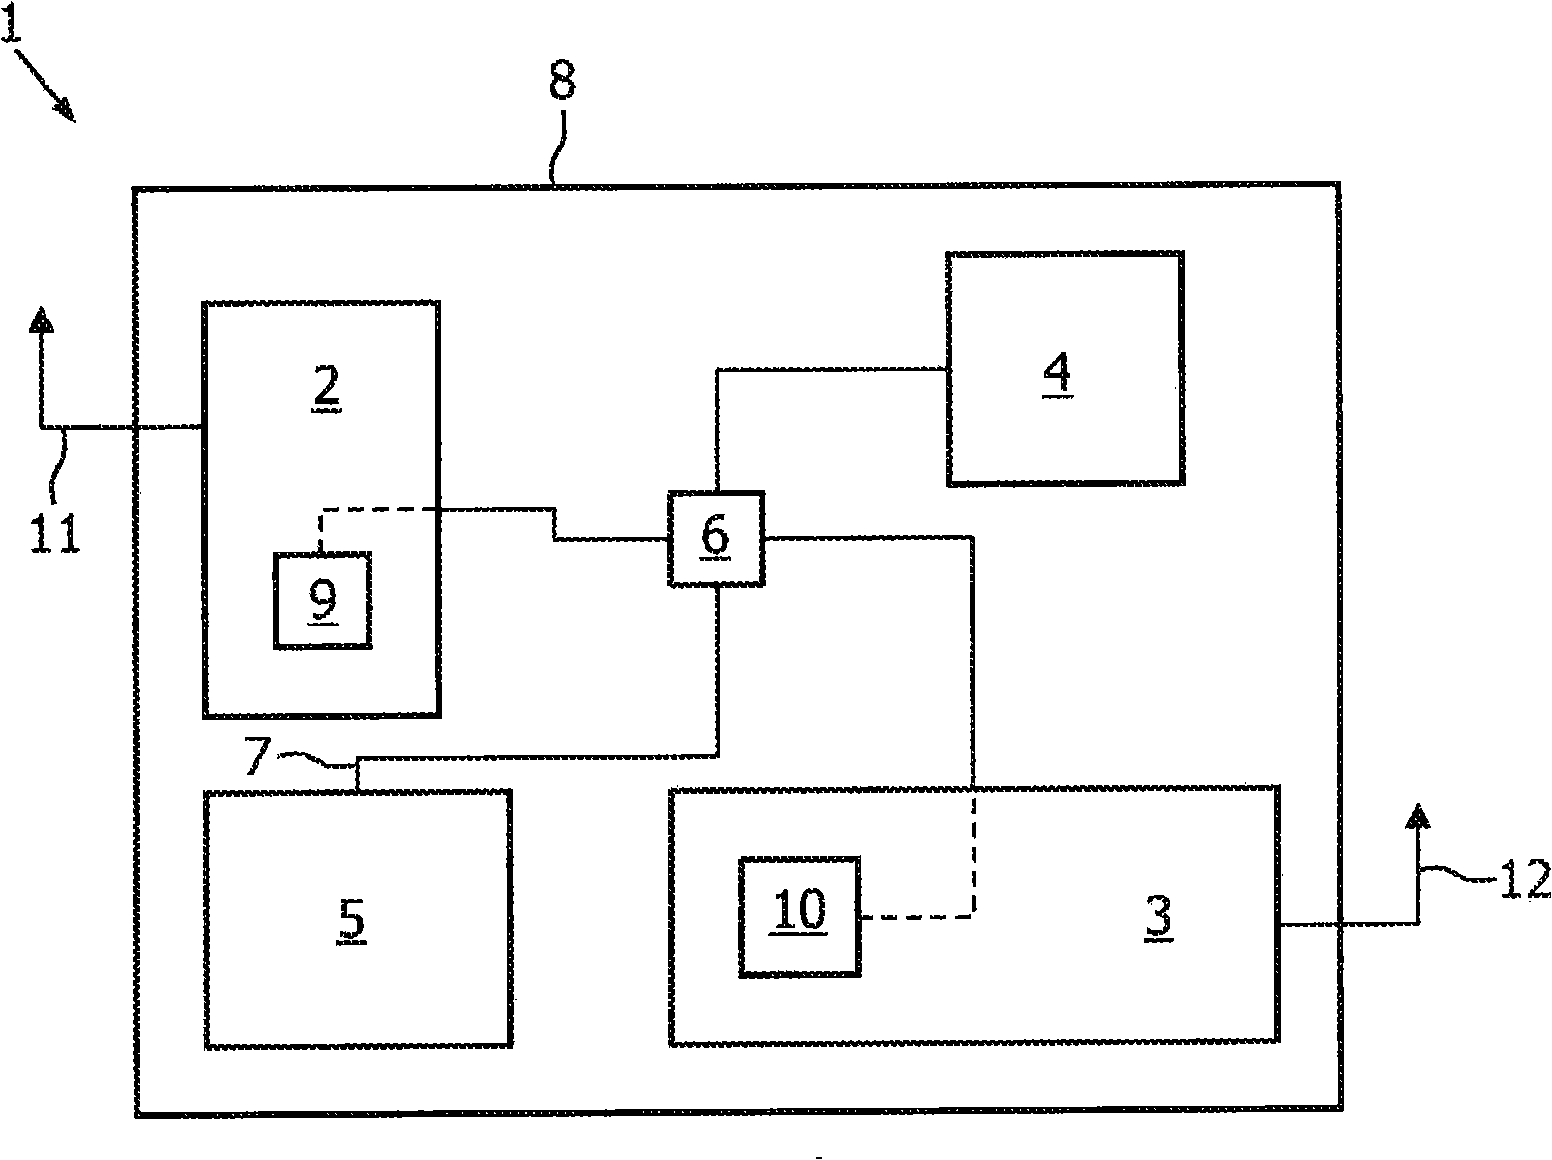 System-on-chip apparatus with time shareable memory and method for operating such an apparatus